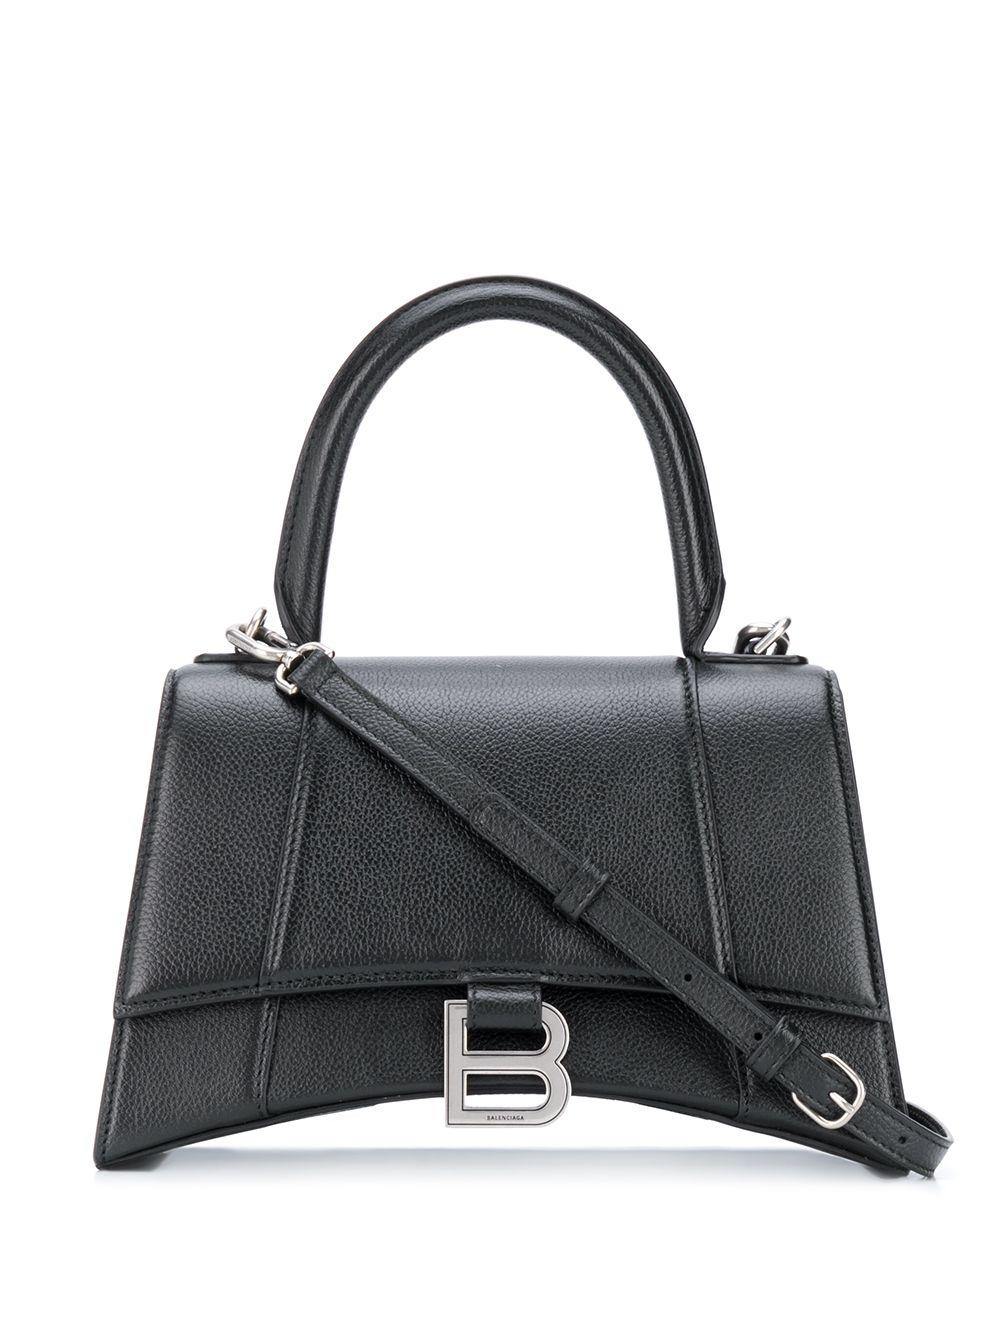 Balenciaga Leather Hourglass S Tote Bag in Black - Lyst